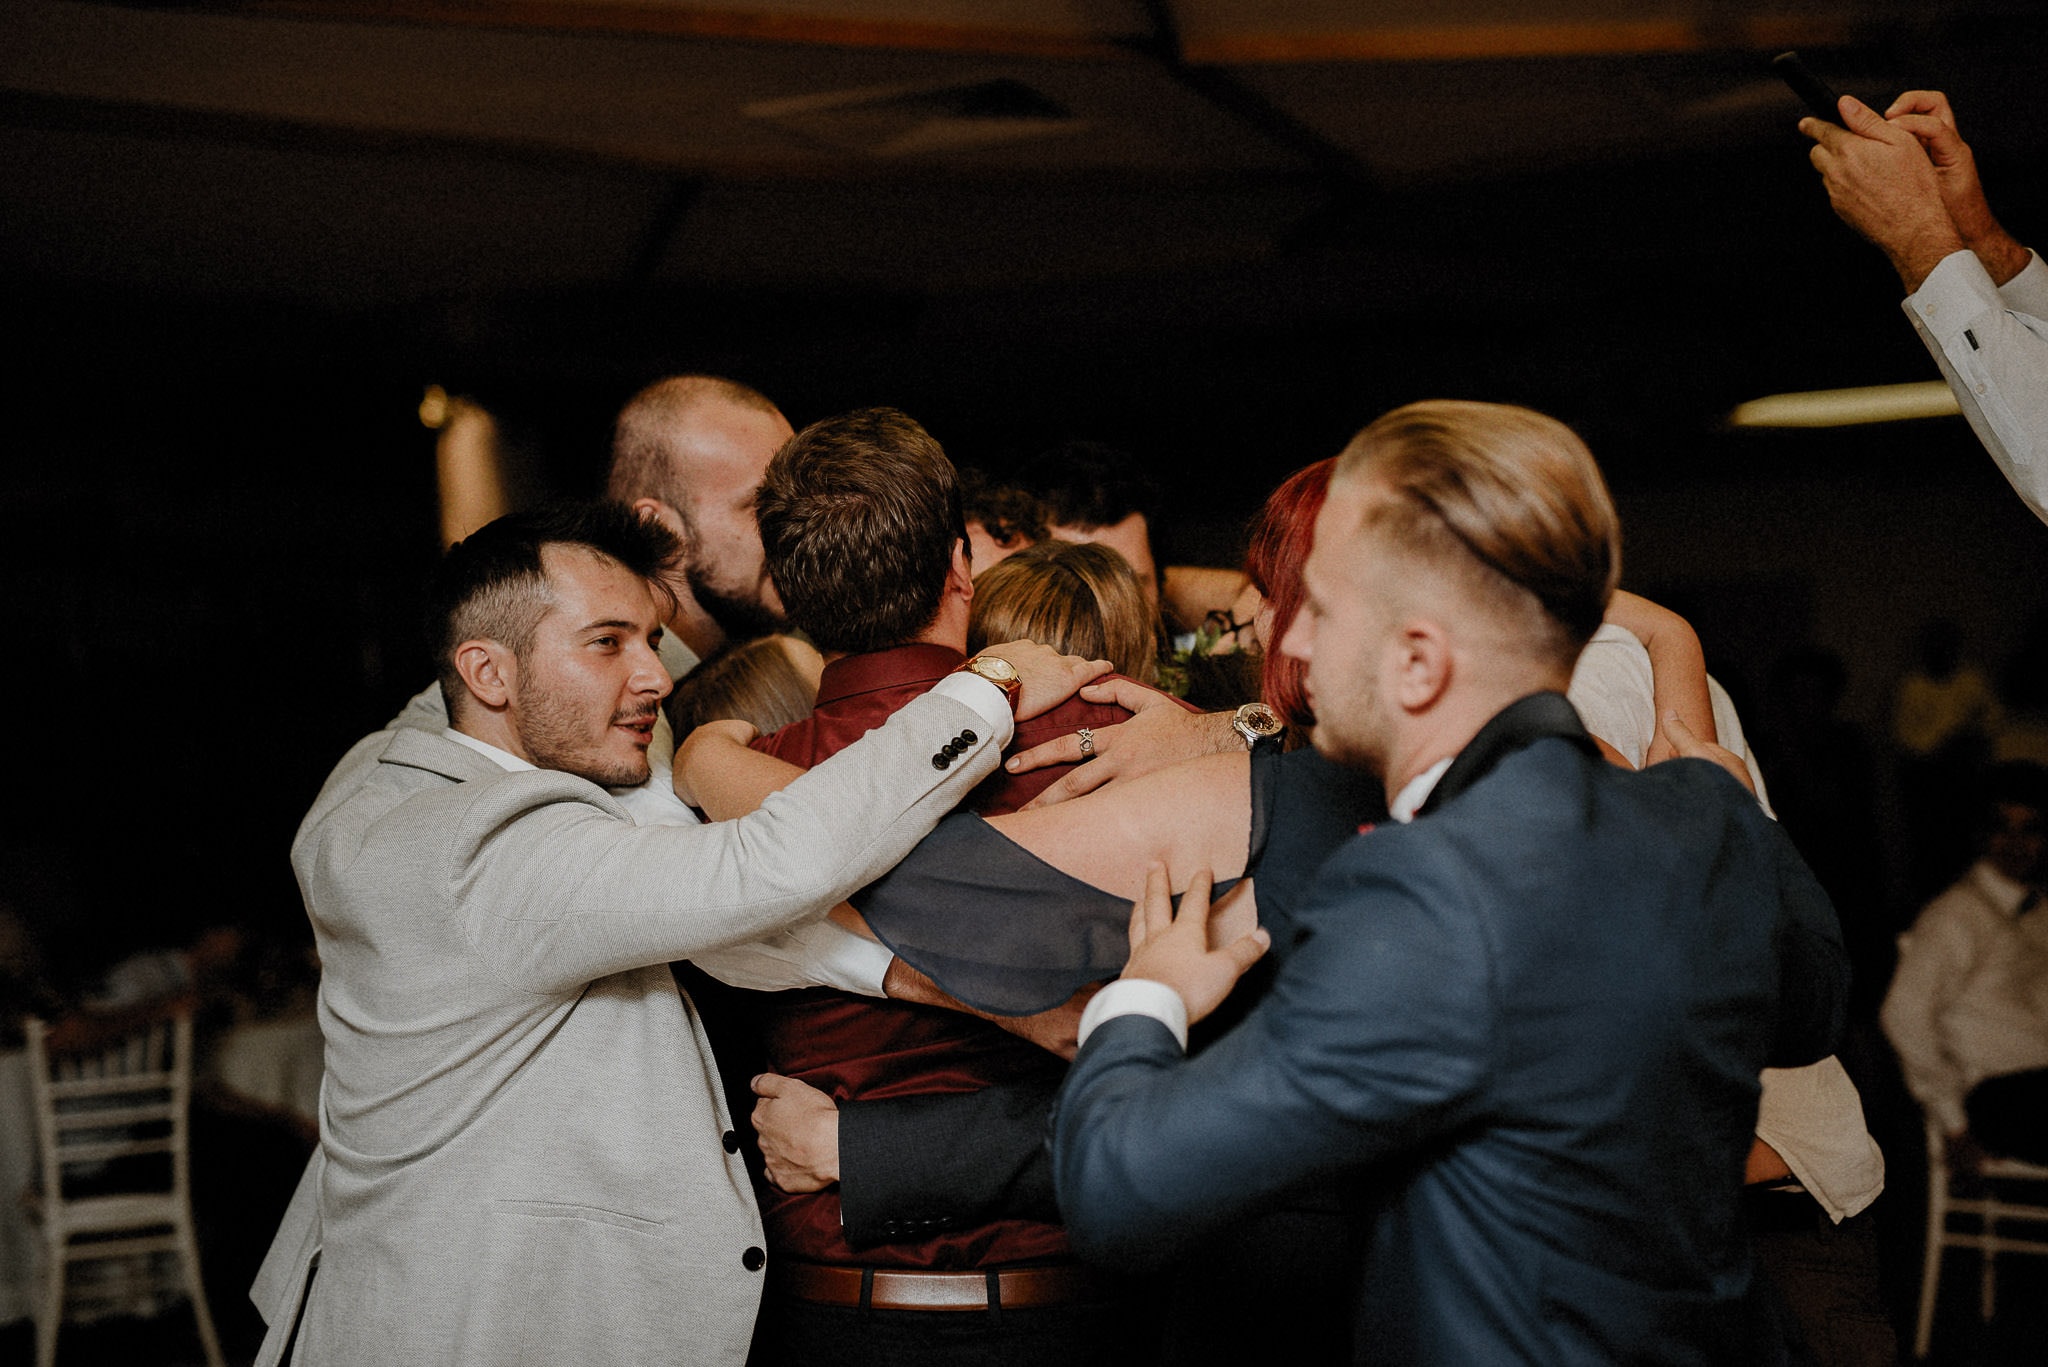 bride and groom are surrounded by all their friends in a group hug